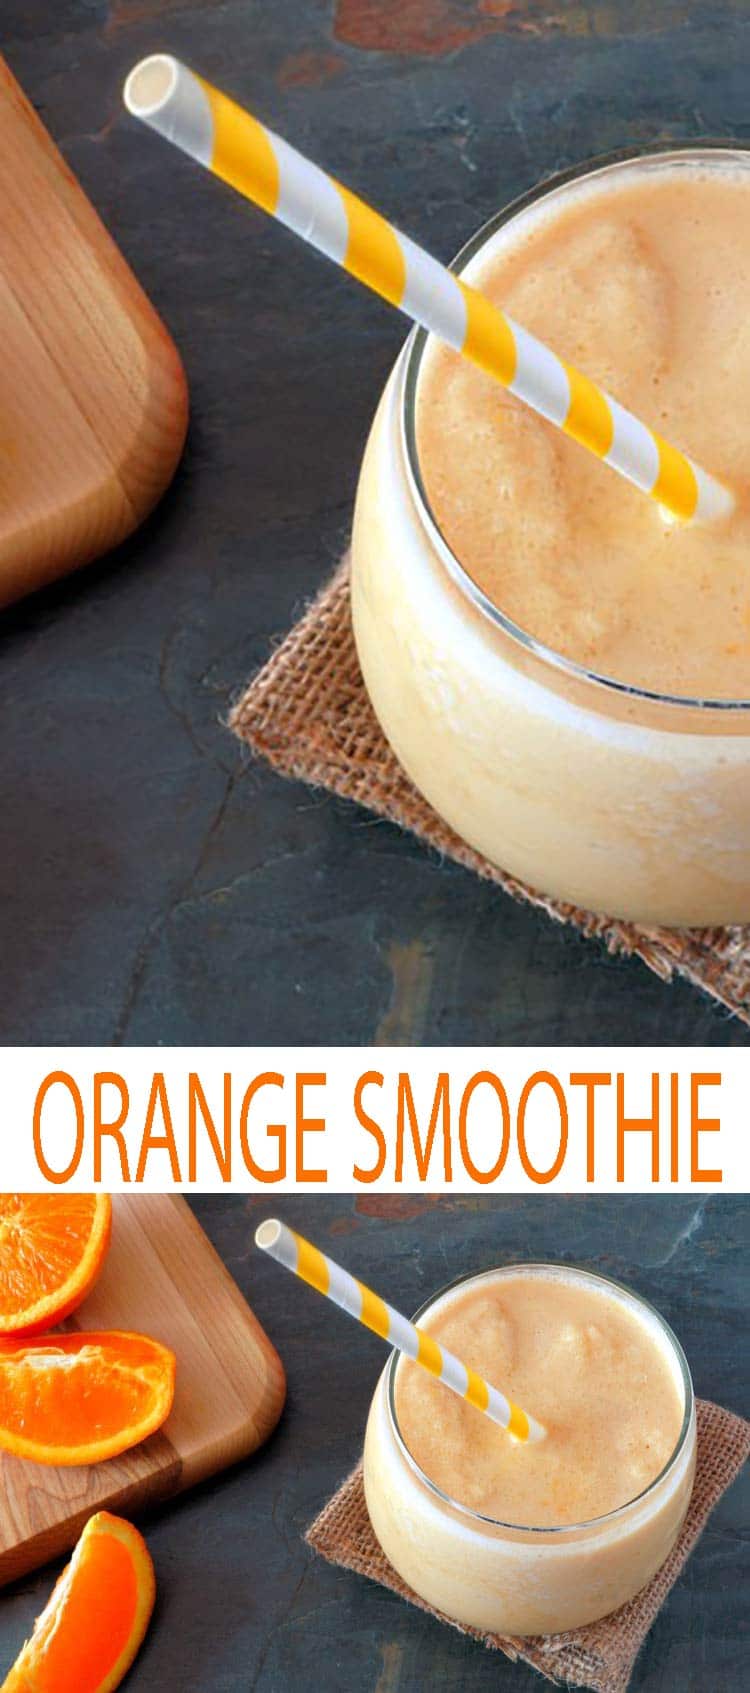 healthy orange smoothie great for starting the day off right with fresh whole ingredients. #smoothies #smoothierecipes #quickbreakfast #oranges